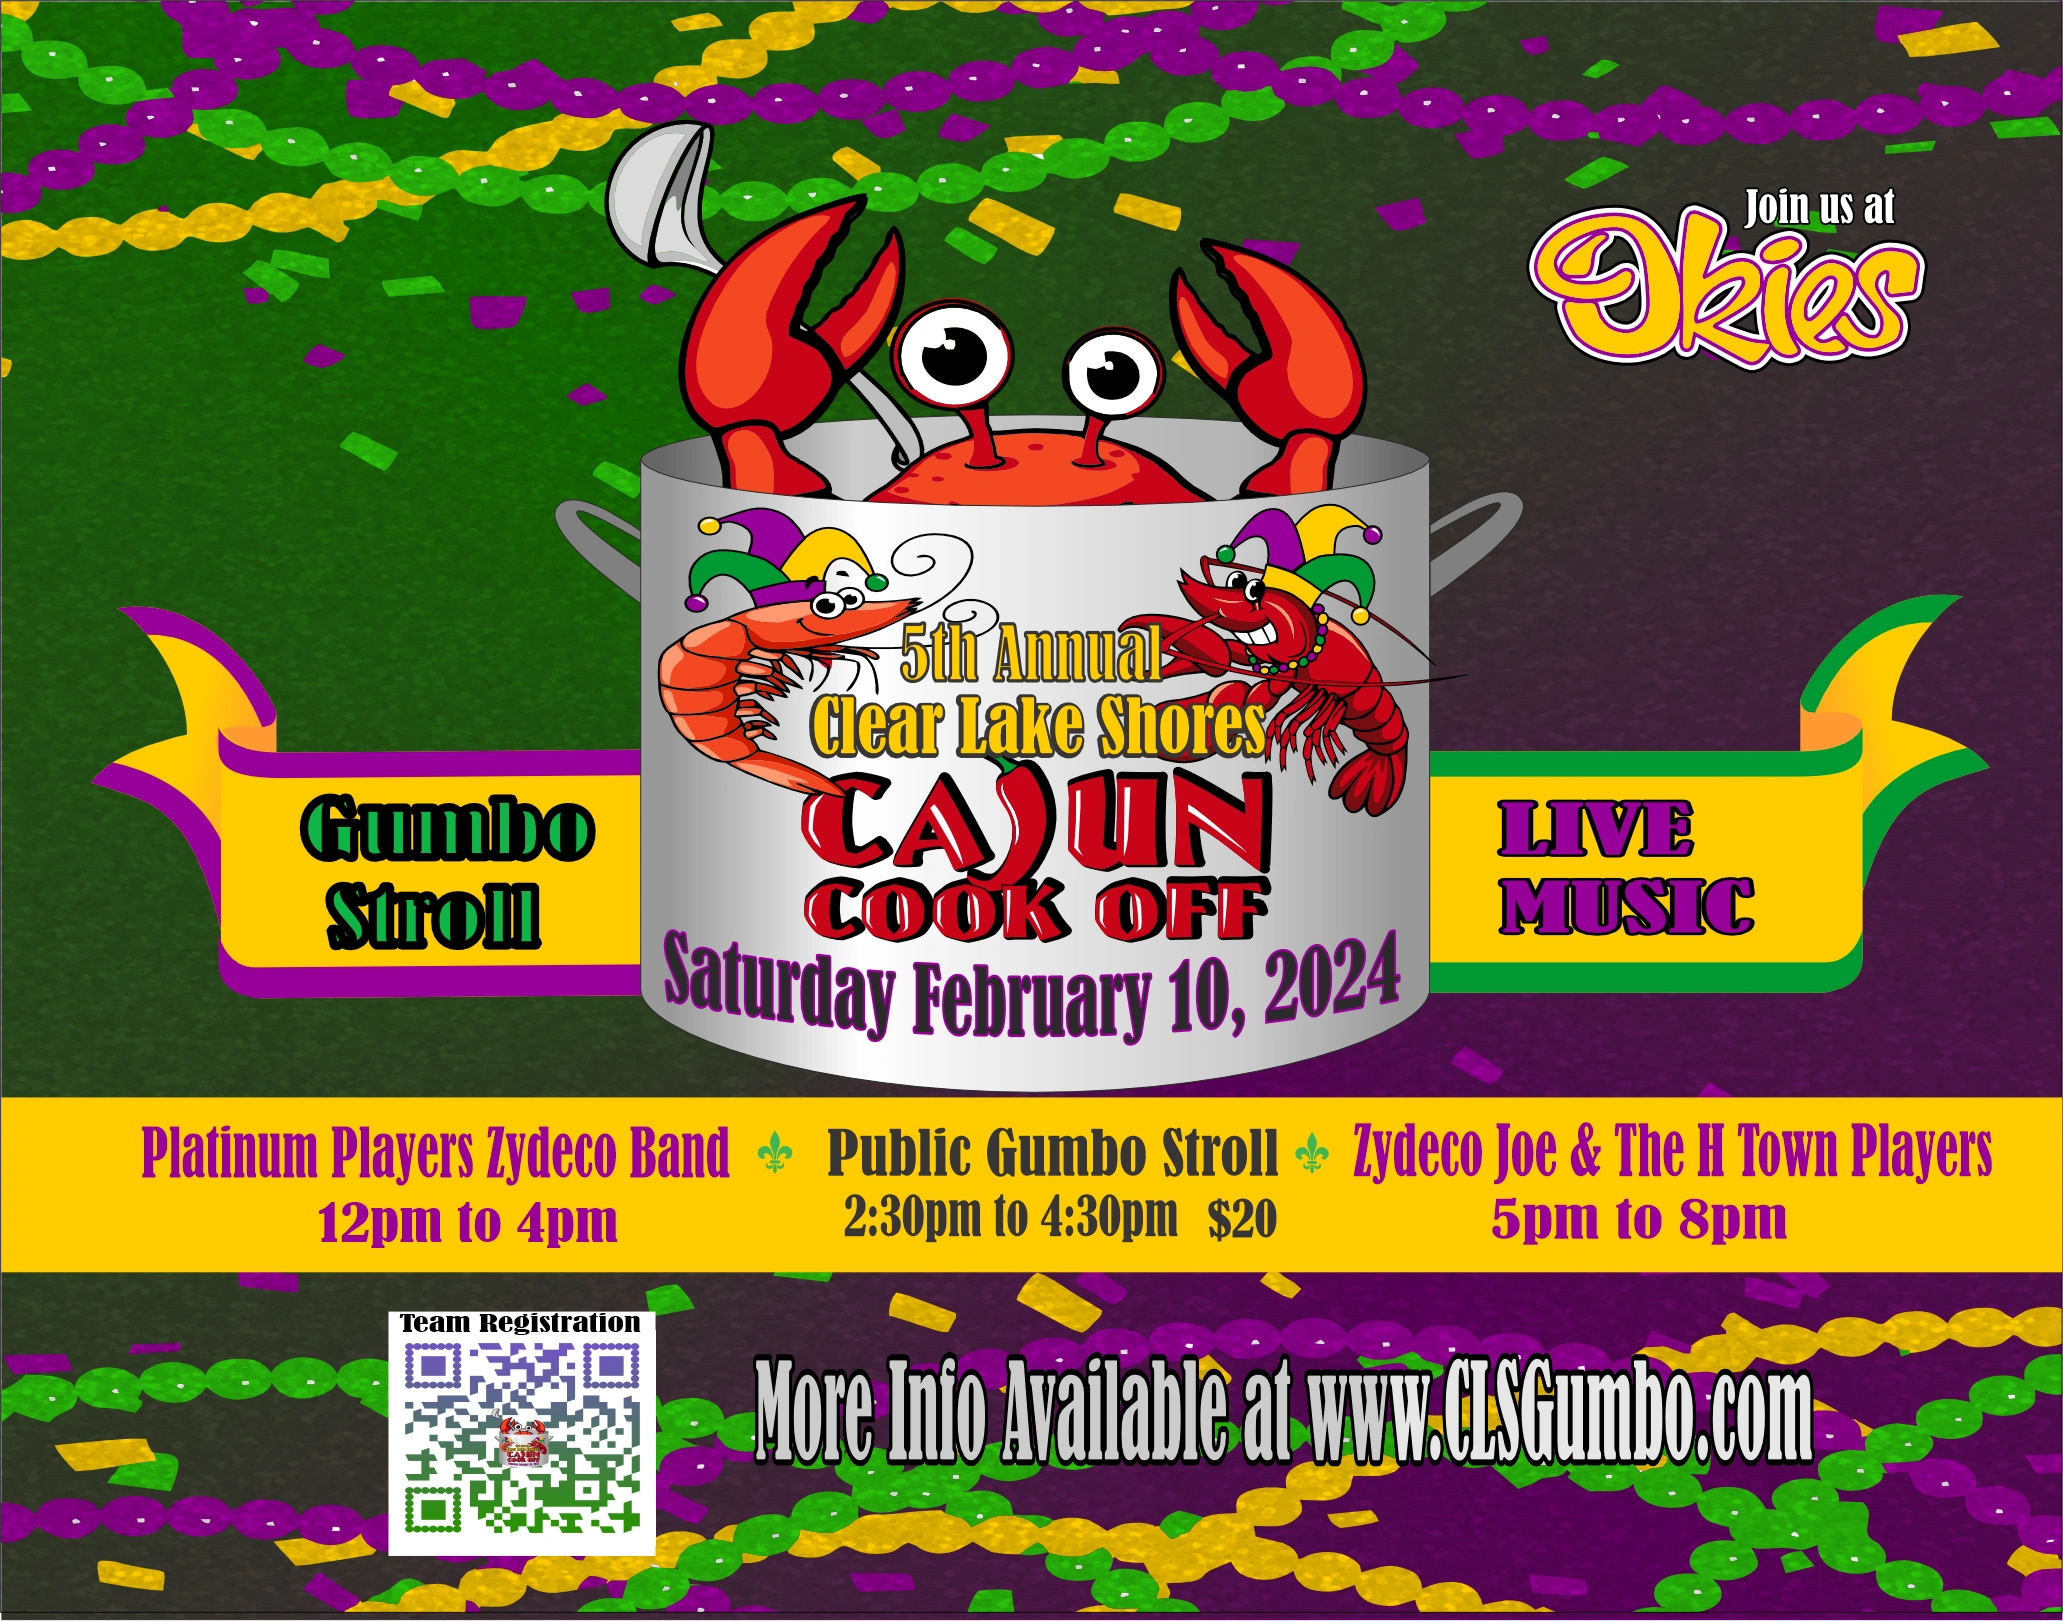  The Cajun Cook Off is a Rain or Shine Event! Hope to see you out there. 
